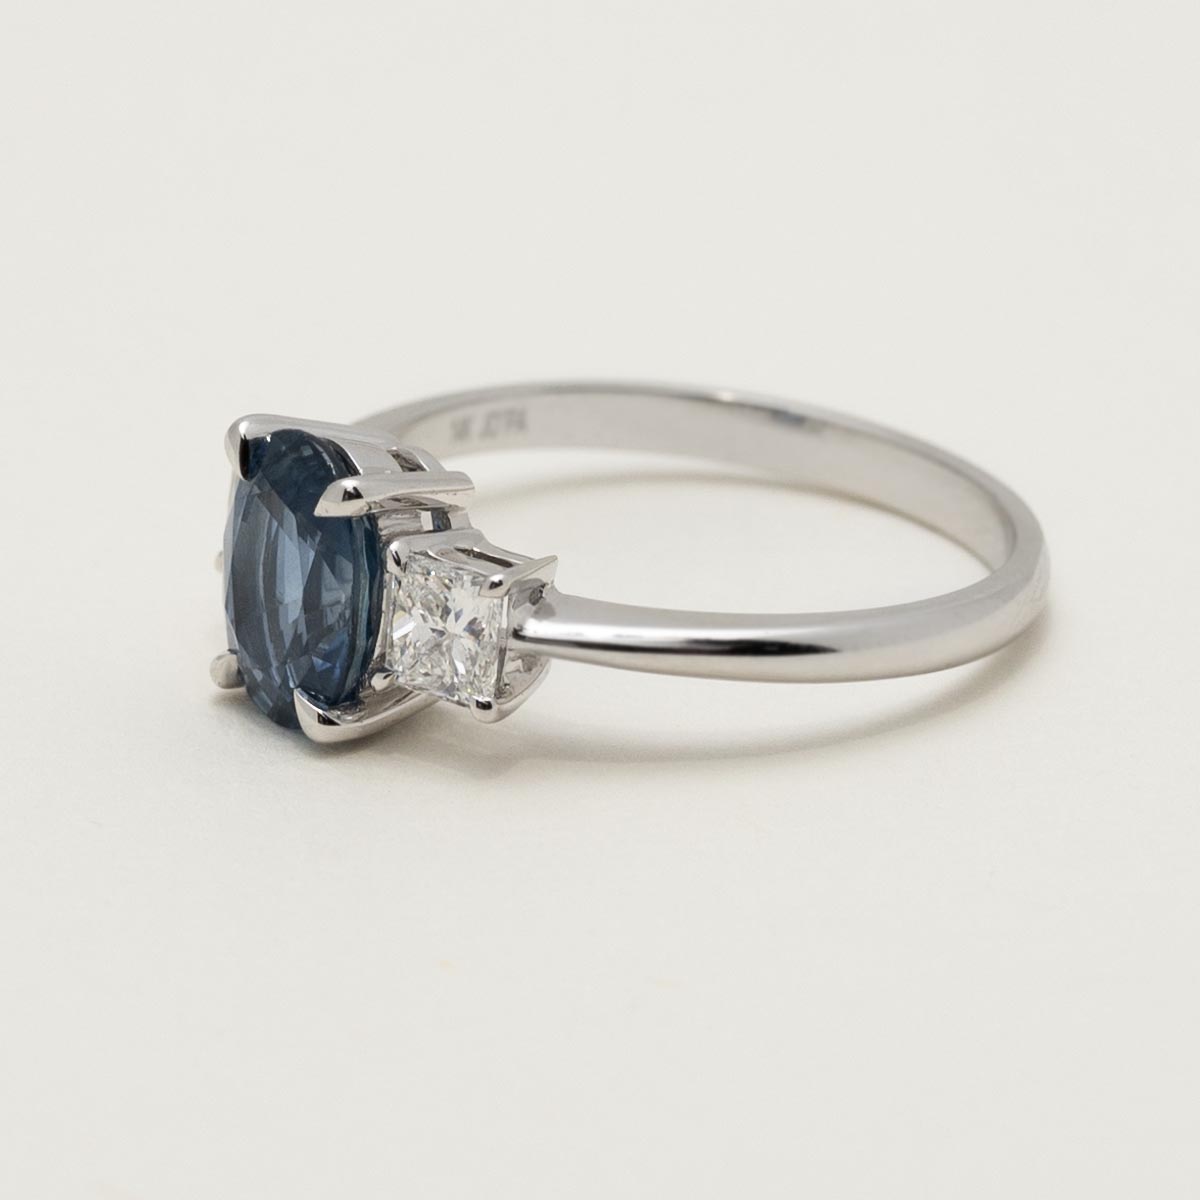 Oval Sapphire Ring in 14kt White Gold with Princess Cut Diamonds (1/2ct tw)